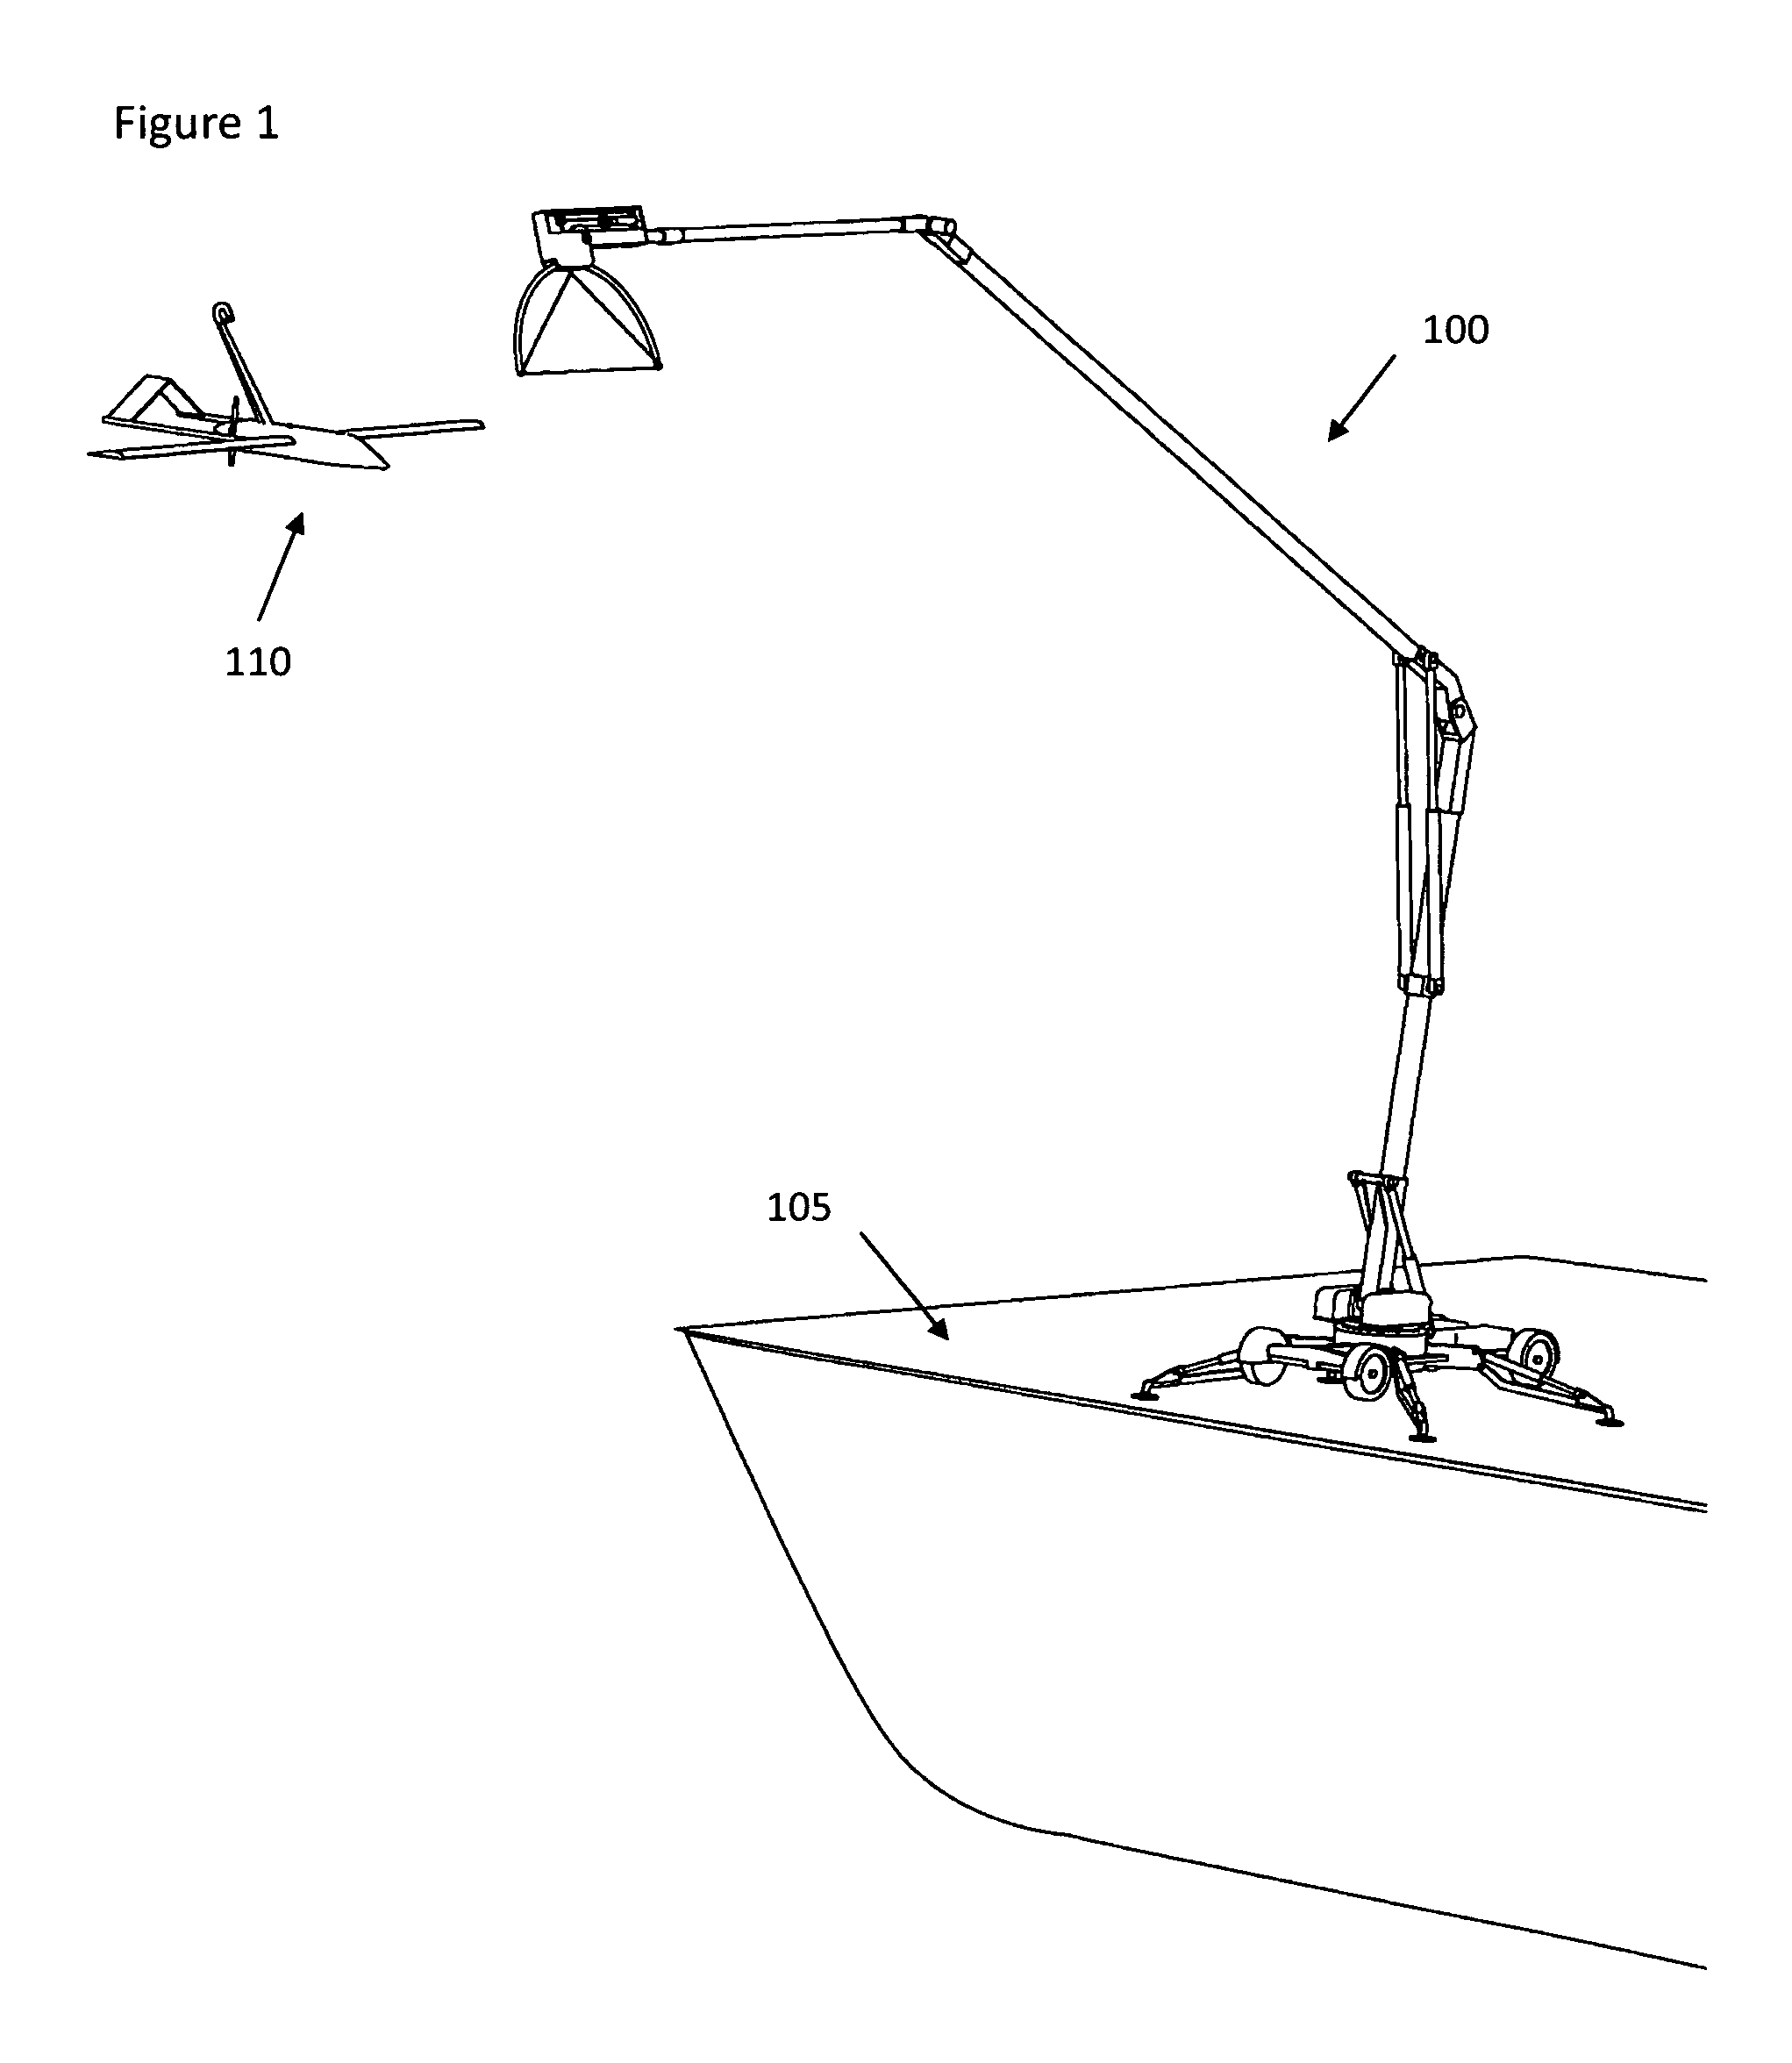 Stabilized UAV recovery system